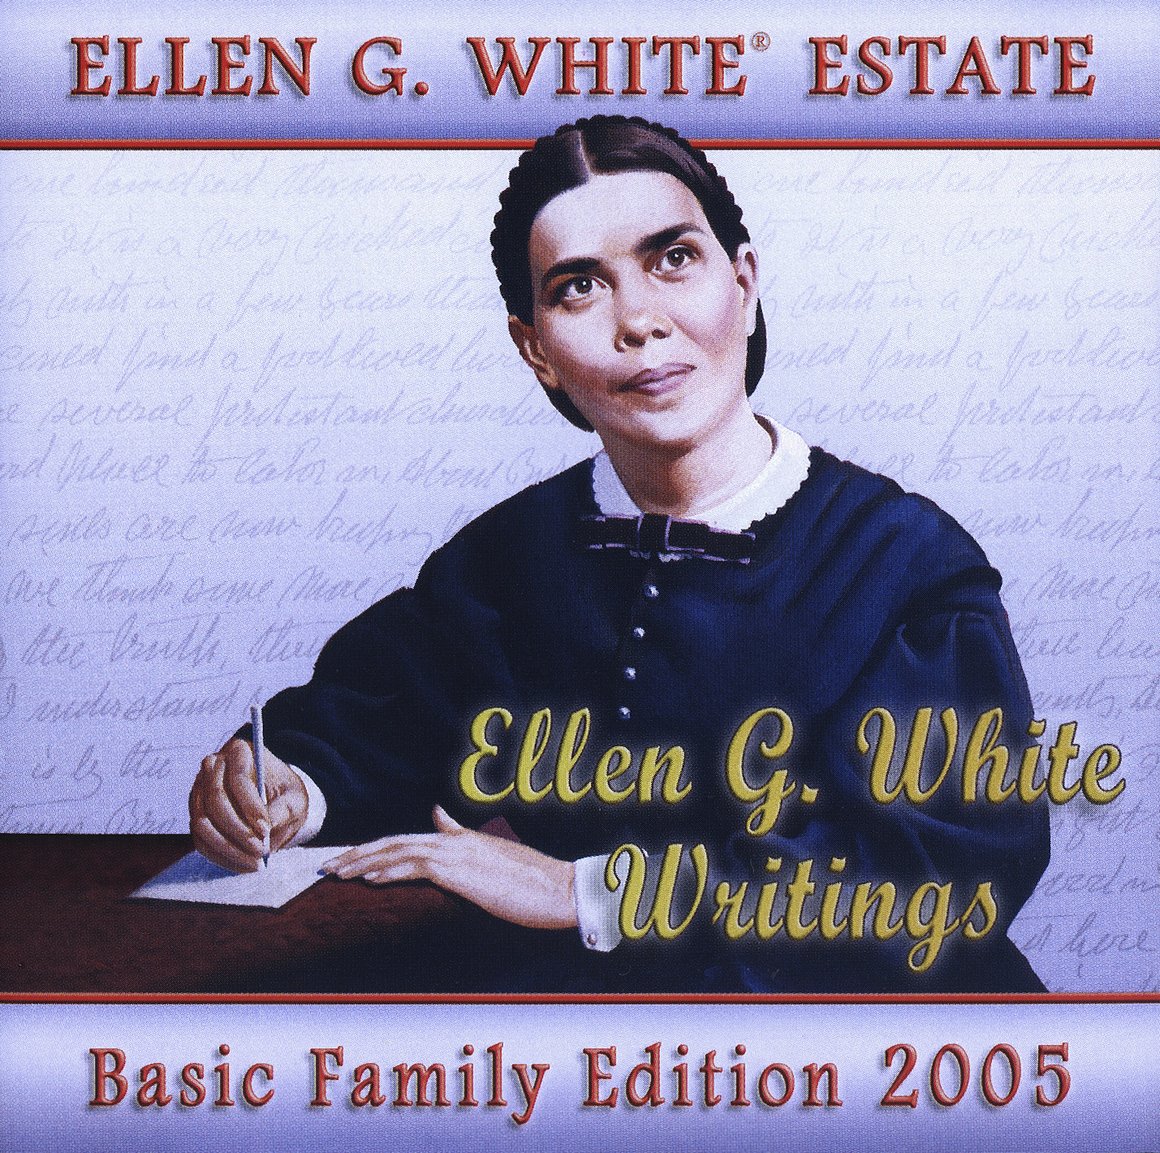 Ellen g white writings comprehensive research edition cd-rom